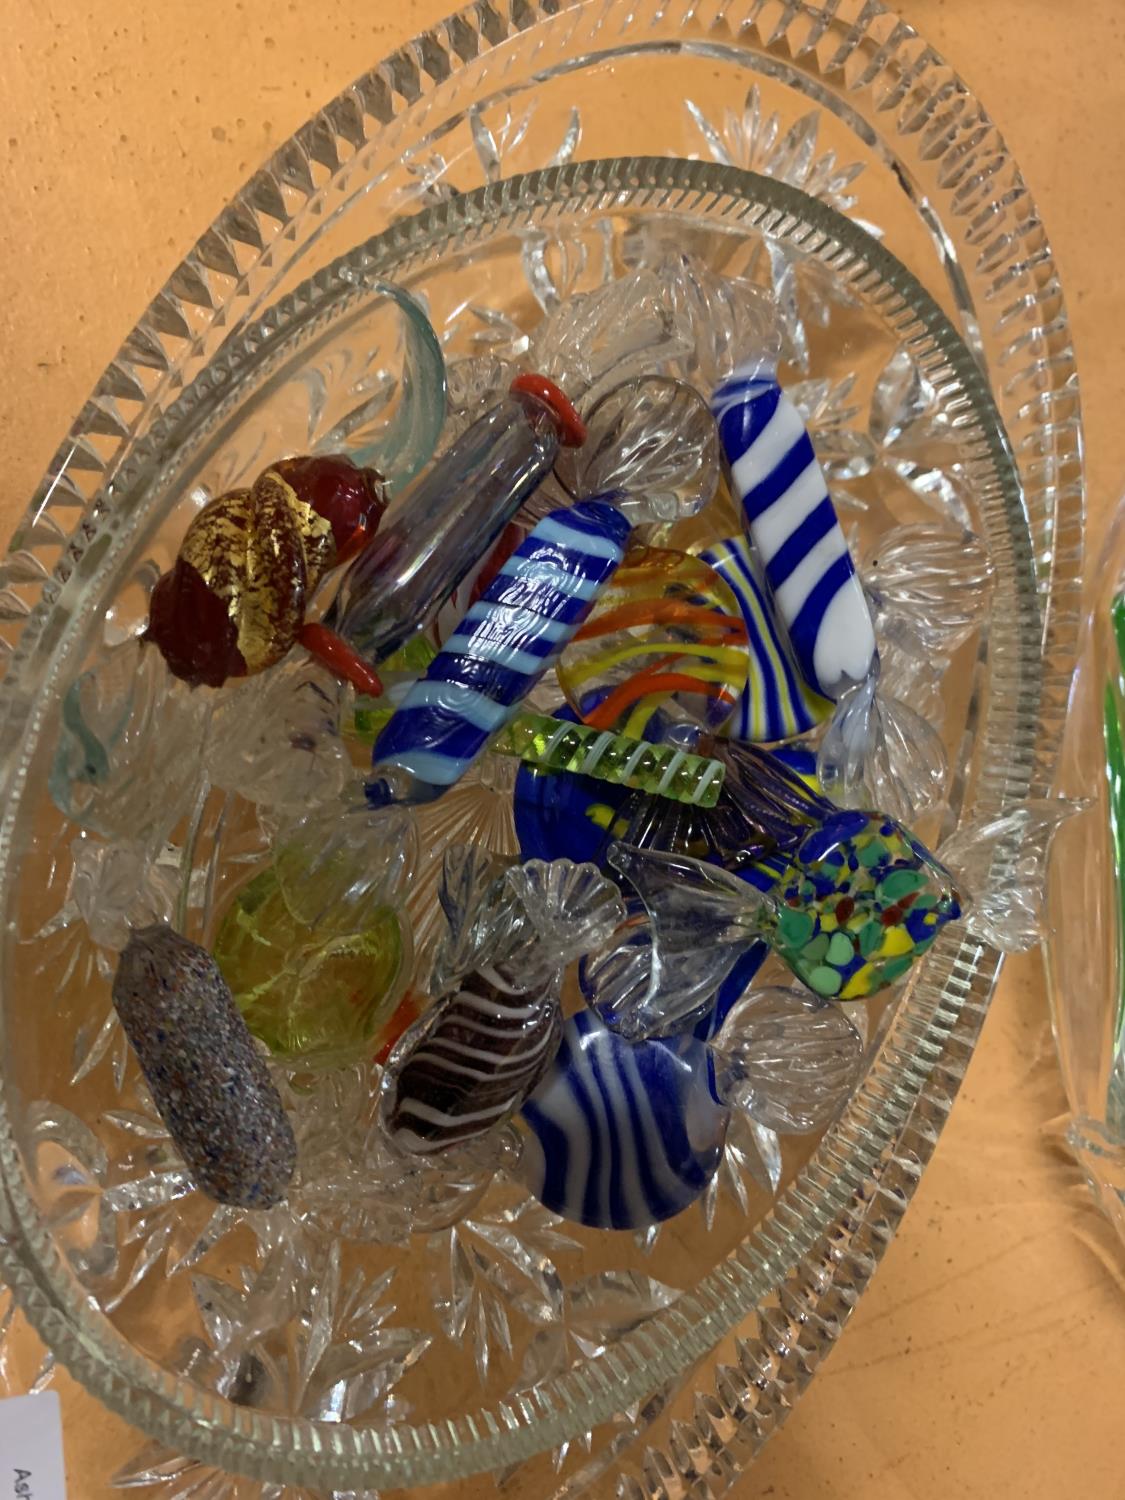 A GROUP OF GLASSWARE TO INCLUDE MURANO GLASS SWEETS IN THEIR GLASS WRAPPERS - Image 2 of 3